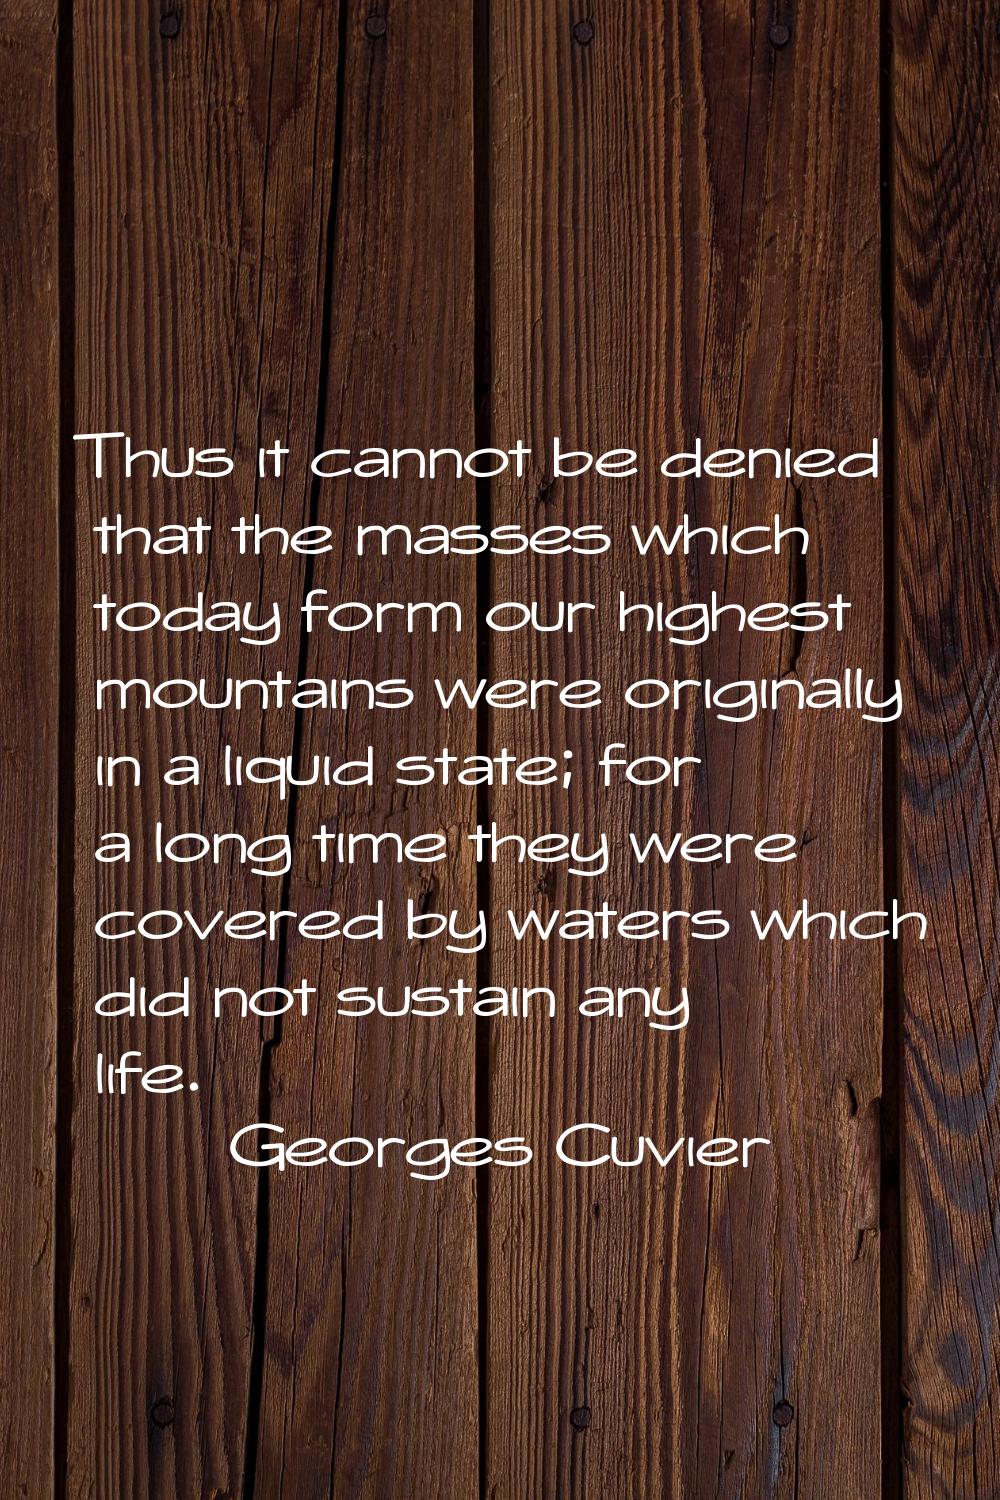 Thus it cannot be denied that the masses which today form our highest mountains were originally in 